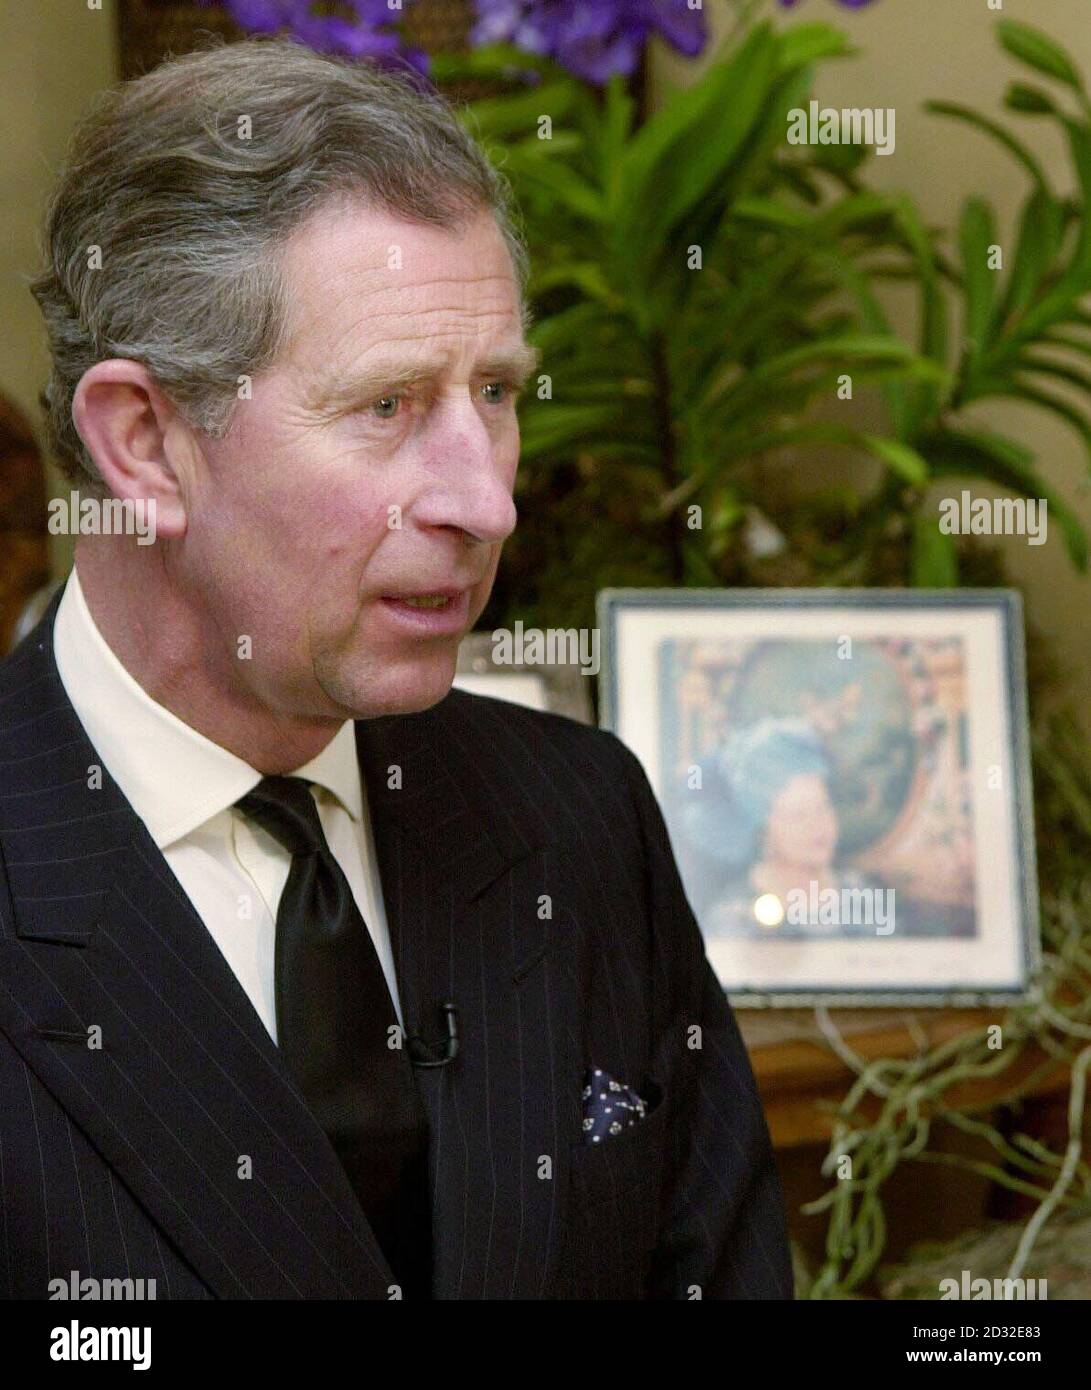 The Prince of Wales at his Highgrove home from where he paid a tribute to his 'darling grandmother', Queen Elizabeth the Queen Mother who died Saturday aged 101. The Prince, wearing a dark suit and black tie, was seated in the Orchard Room.  *... in an outbuilding of his Gloucestershire residence, with two framed photographs of the Queen Mother on a table behind him. Stock Photo